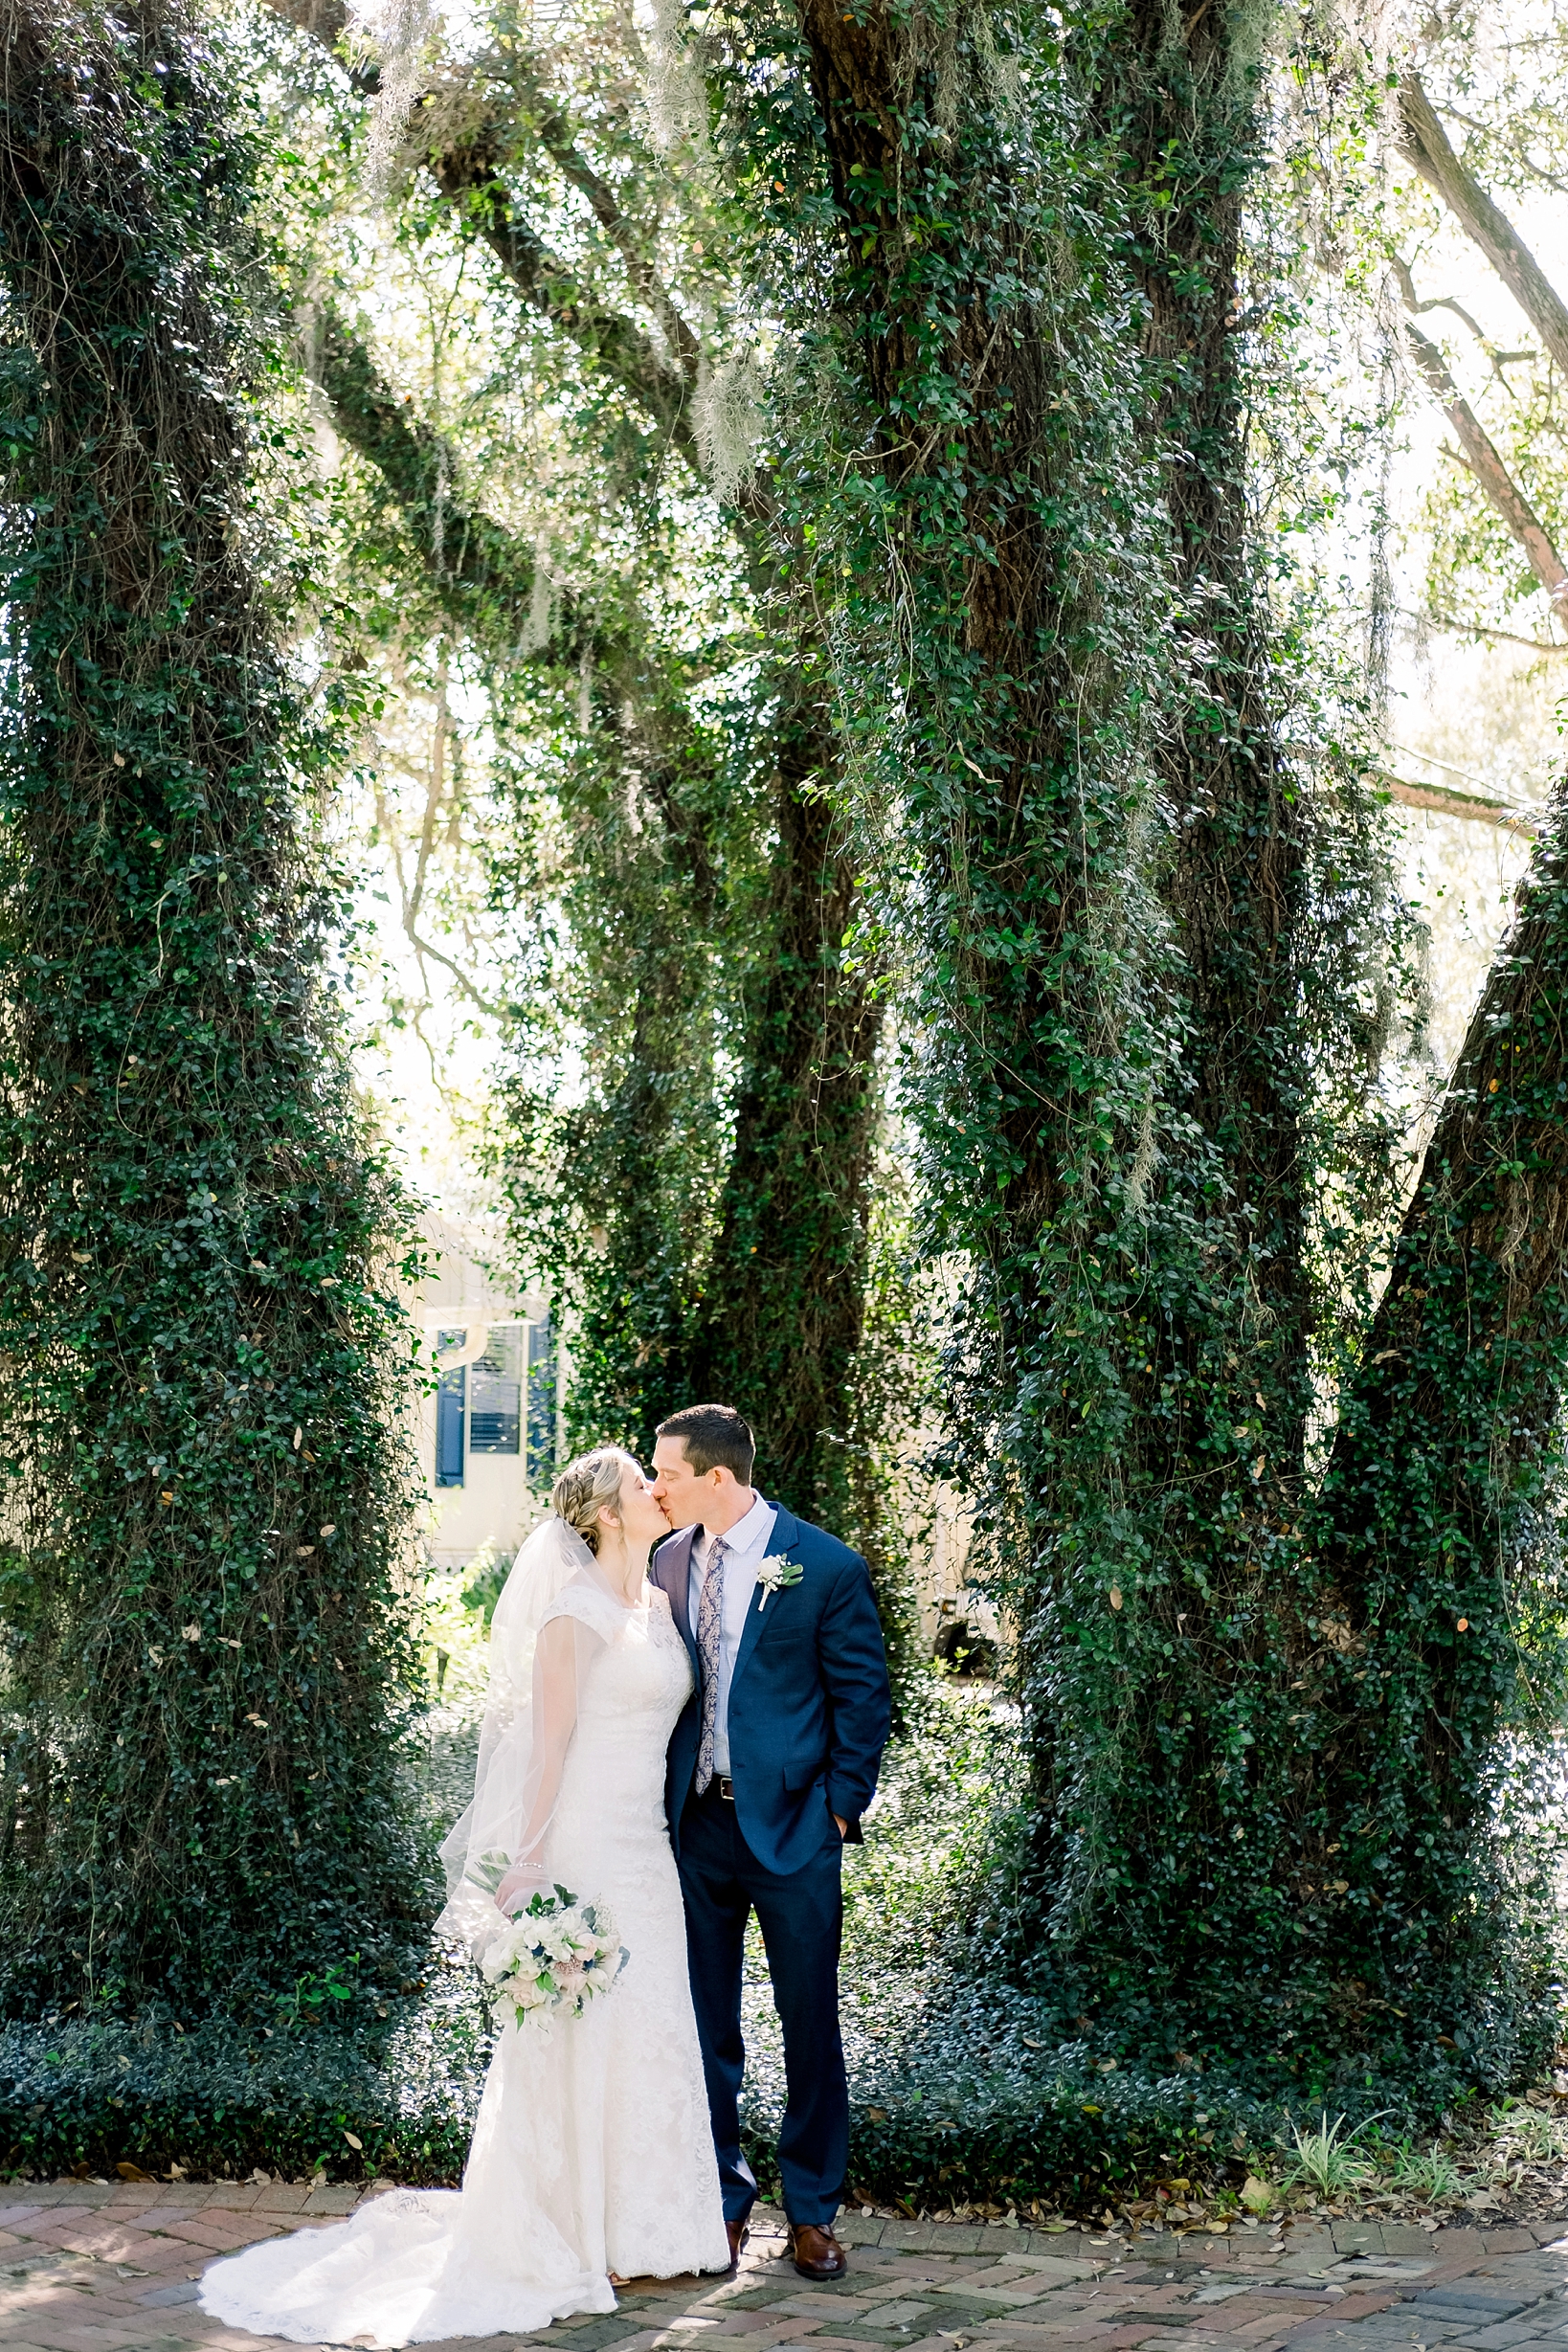 Brie and Groom kiss under the mossy trees on the Cross Creek Ranch property before their wedding